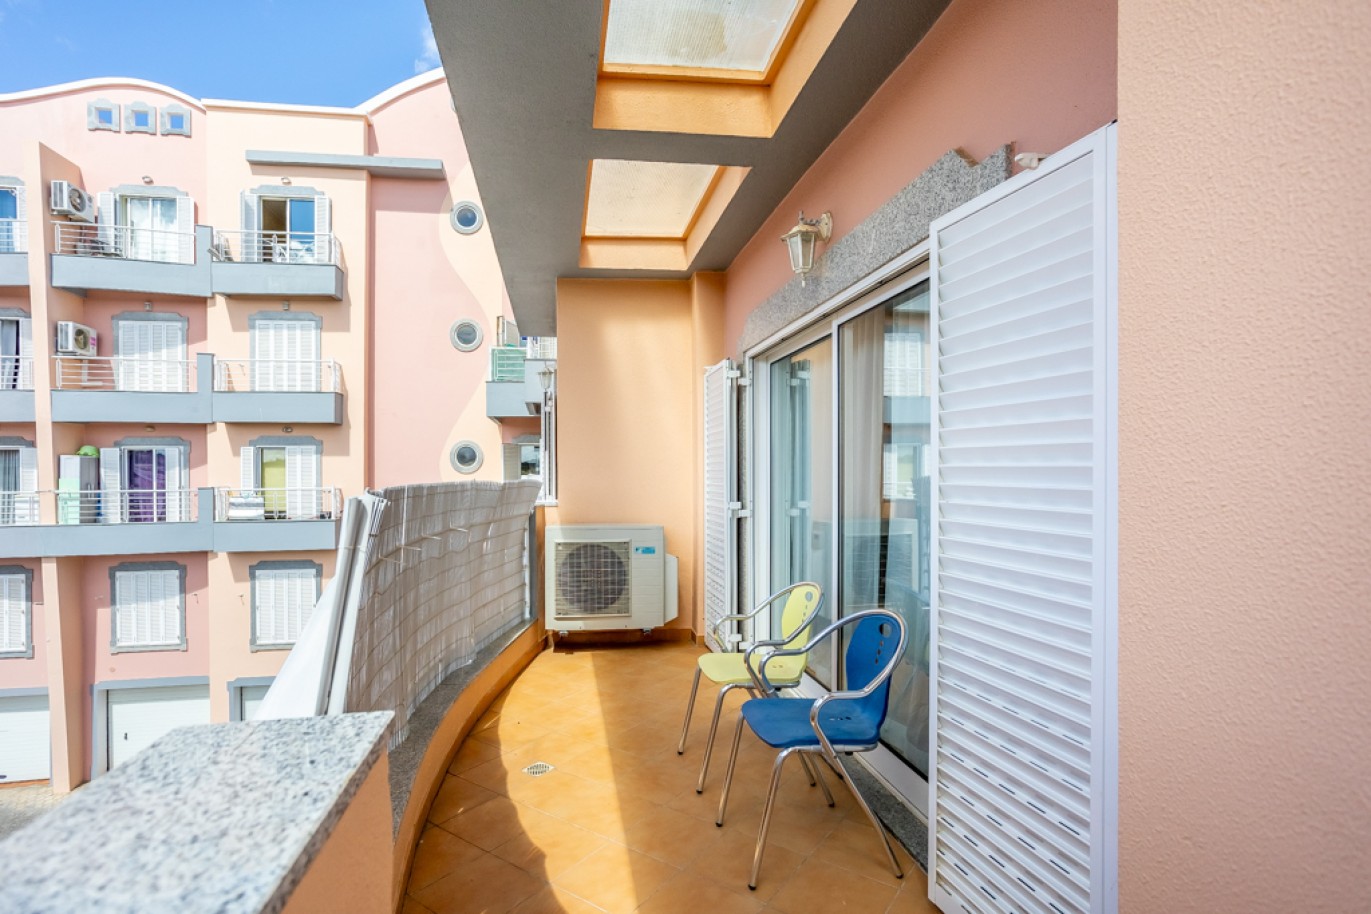 2-Bedroom Appartment with rooftop, for sale in Lagos, Algarve_267189